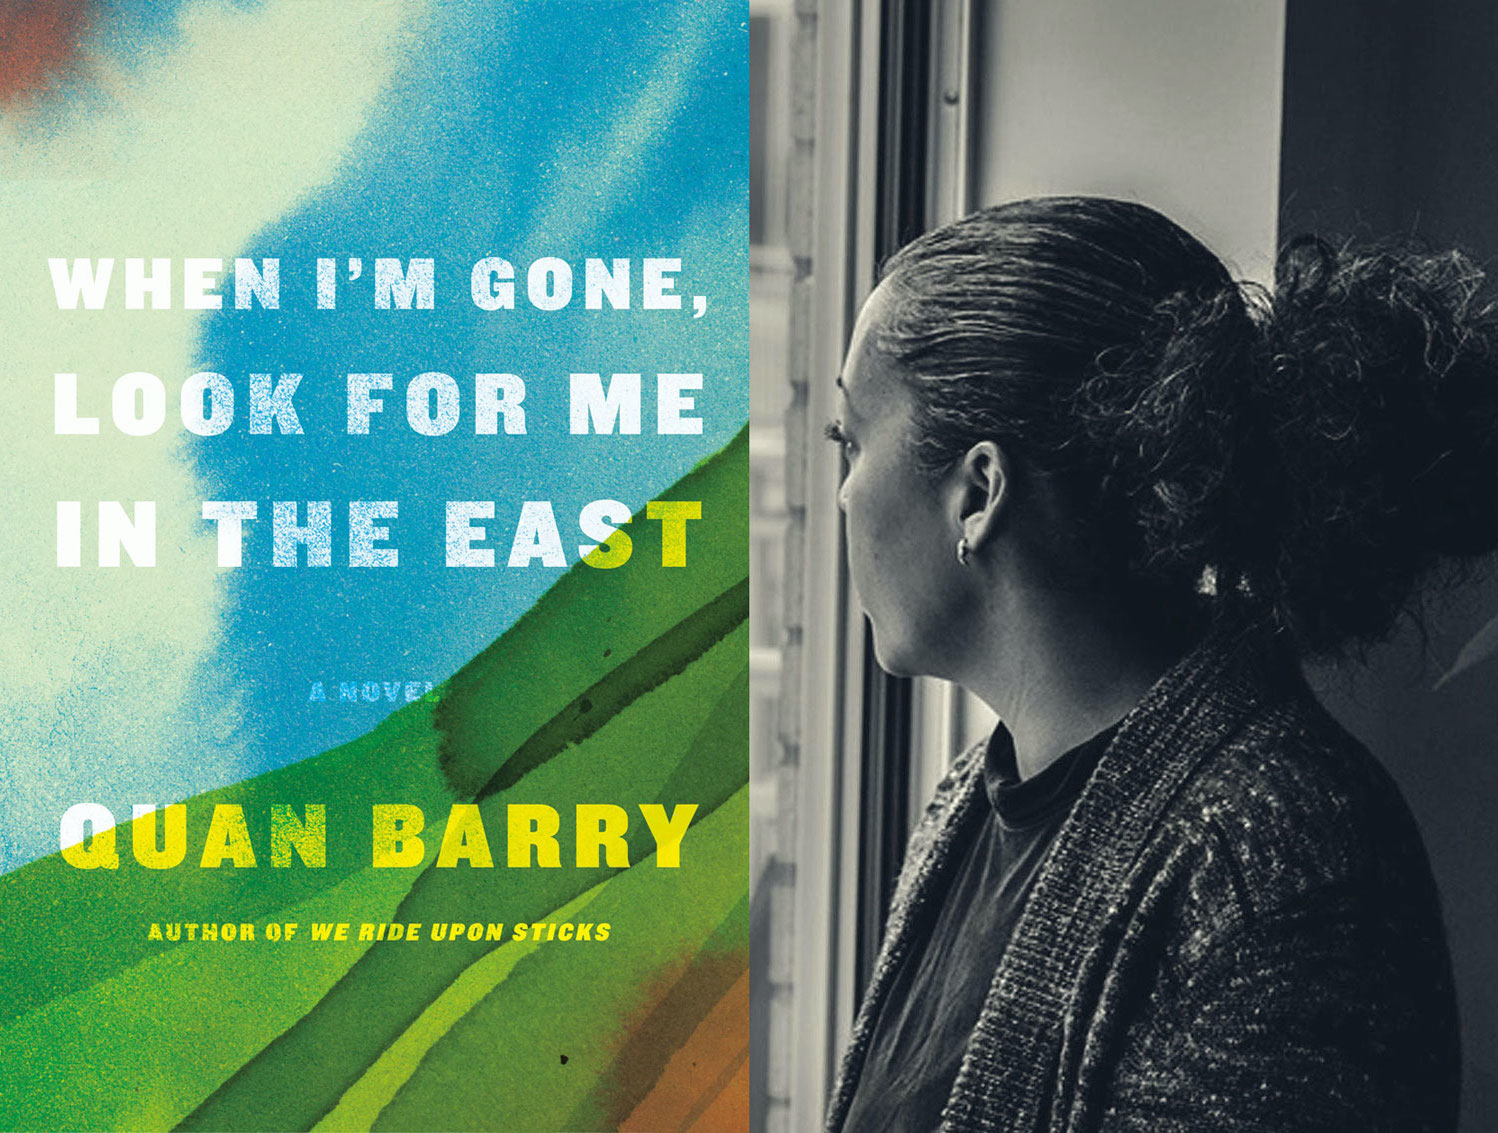 Writer Quan Barry Discusses Her New Novel, When I’m Gone, Look for Me in the East